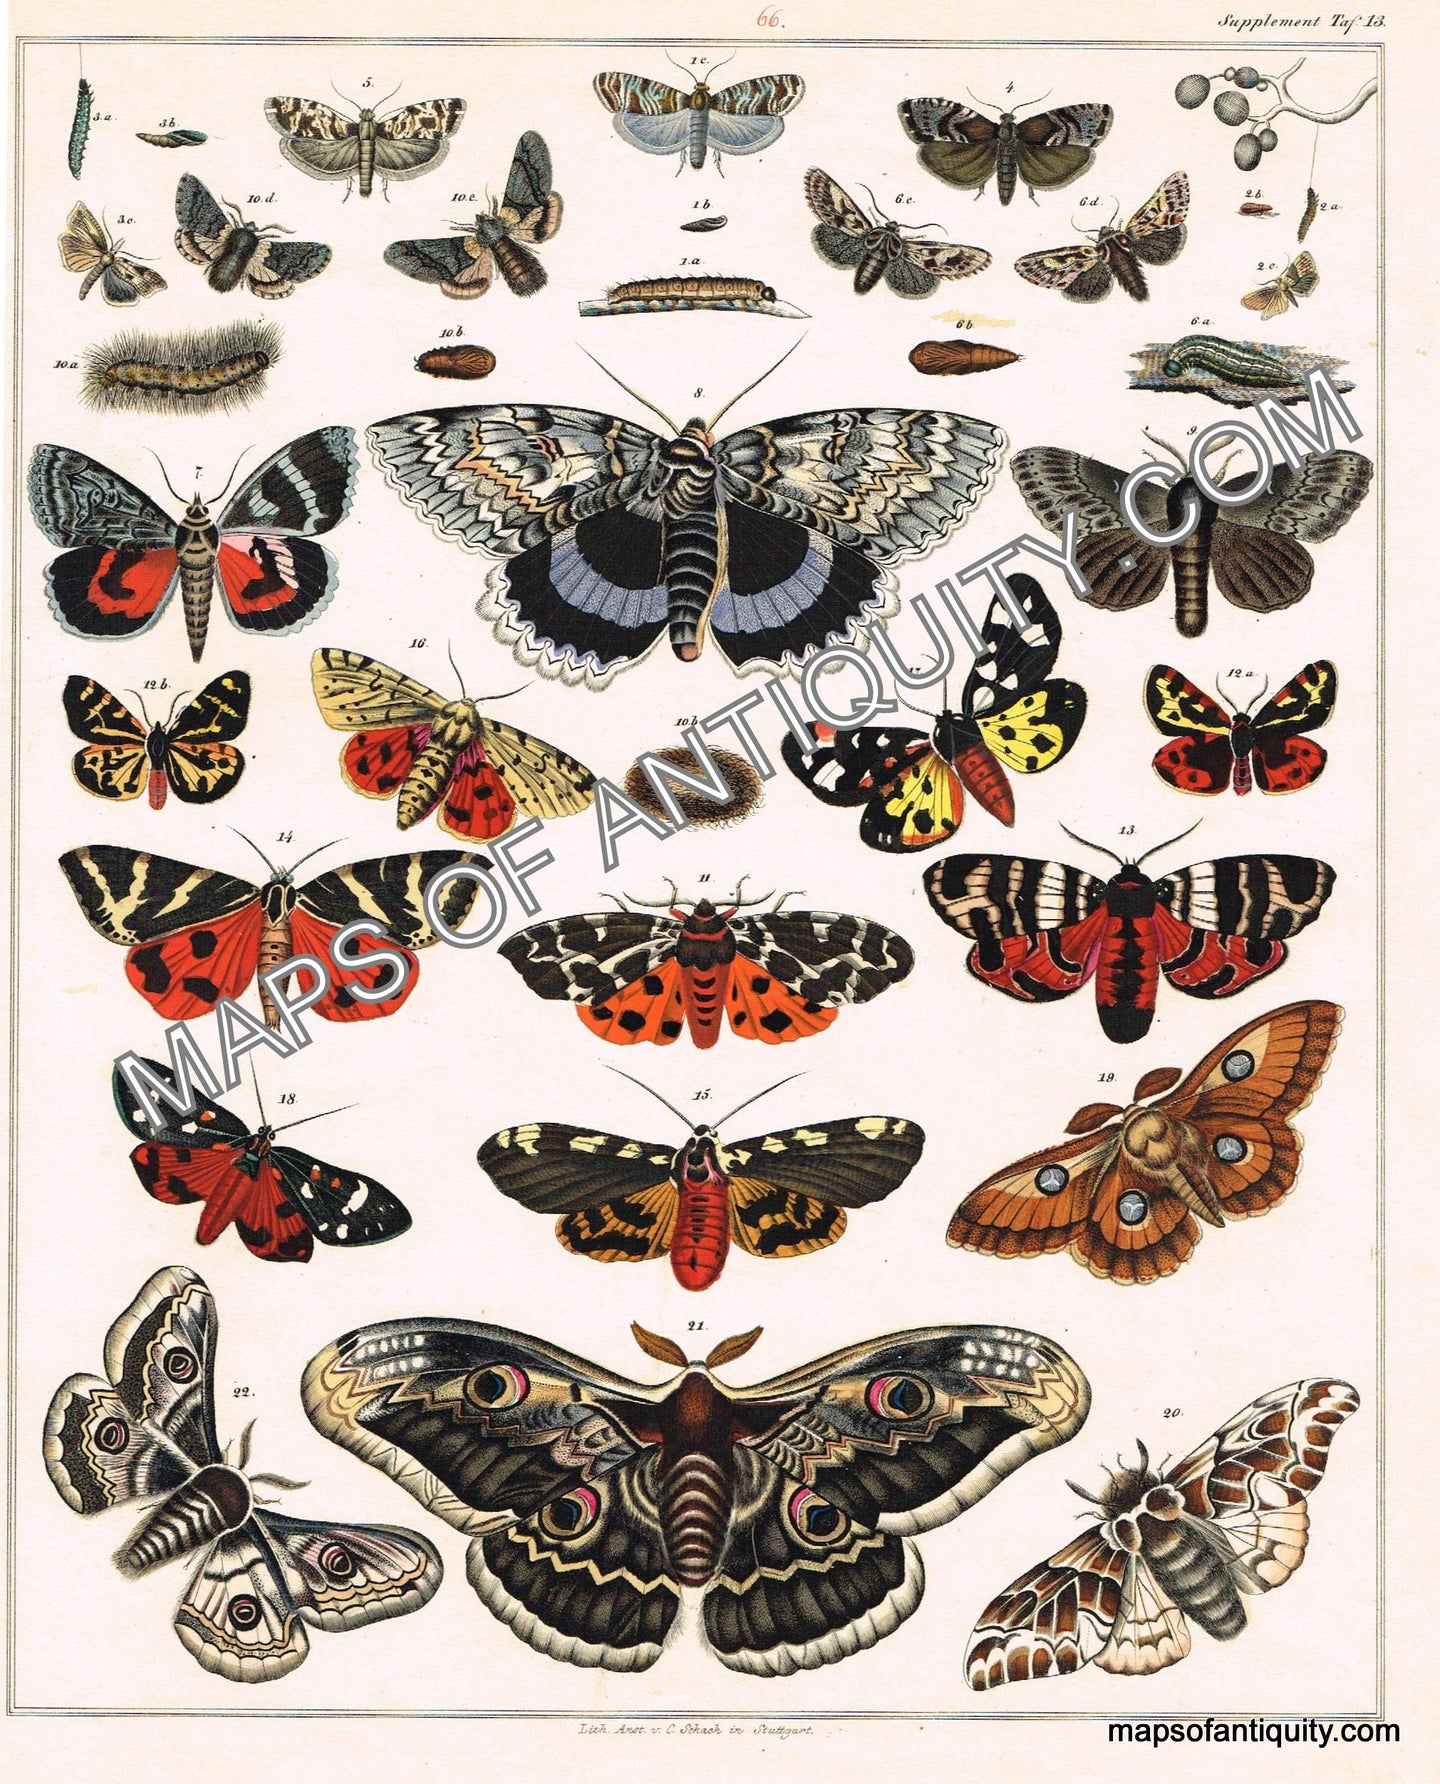 Hand-colored-engraving-Allegemine-Naturgeschichte-v.-Zoologie-Schmetterlinge---Butterflies-Natural-History-Insects-1833-Oken-Maps-Of-Antiquity